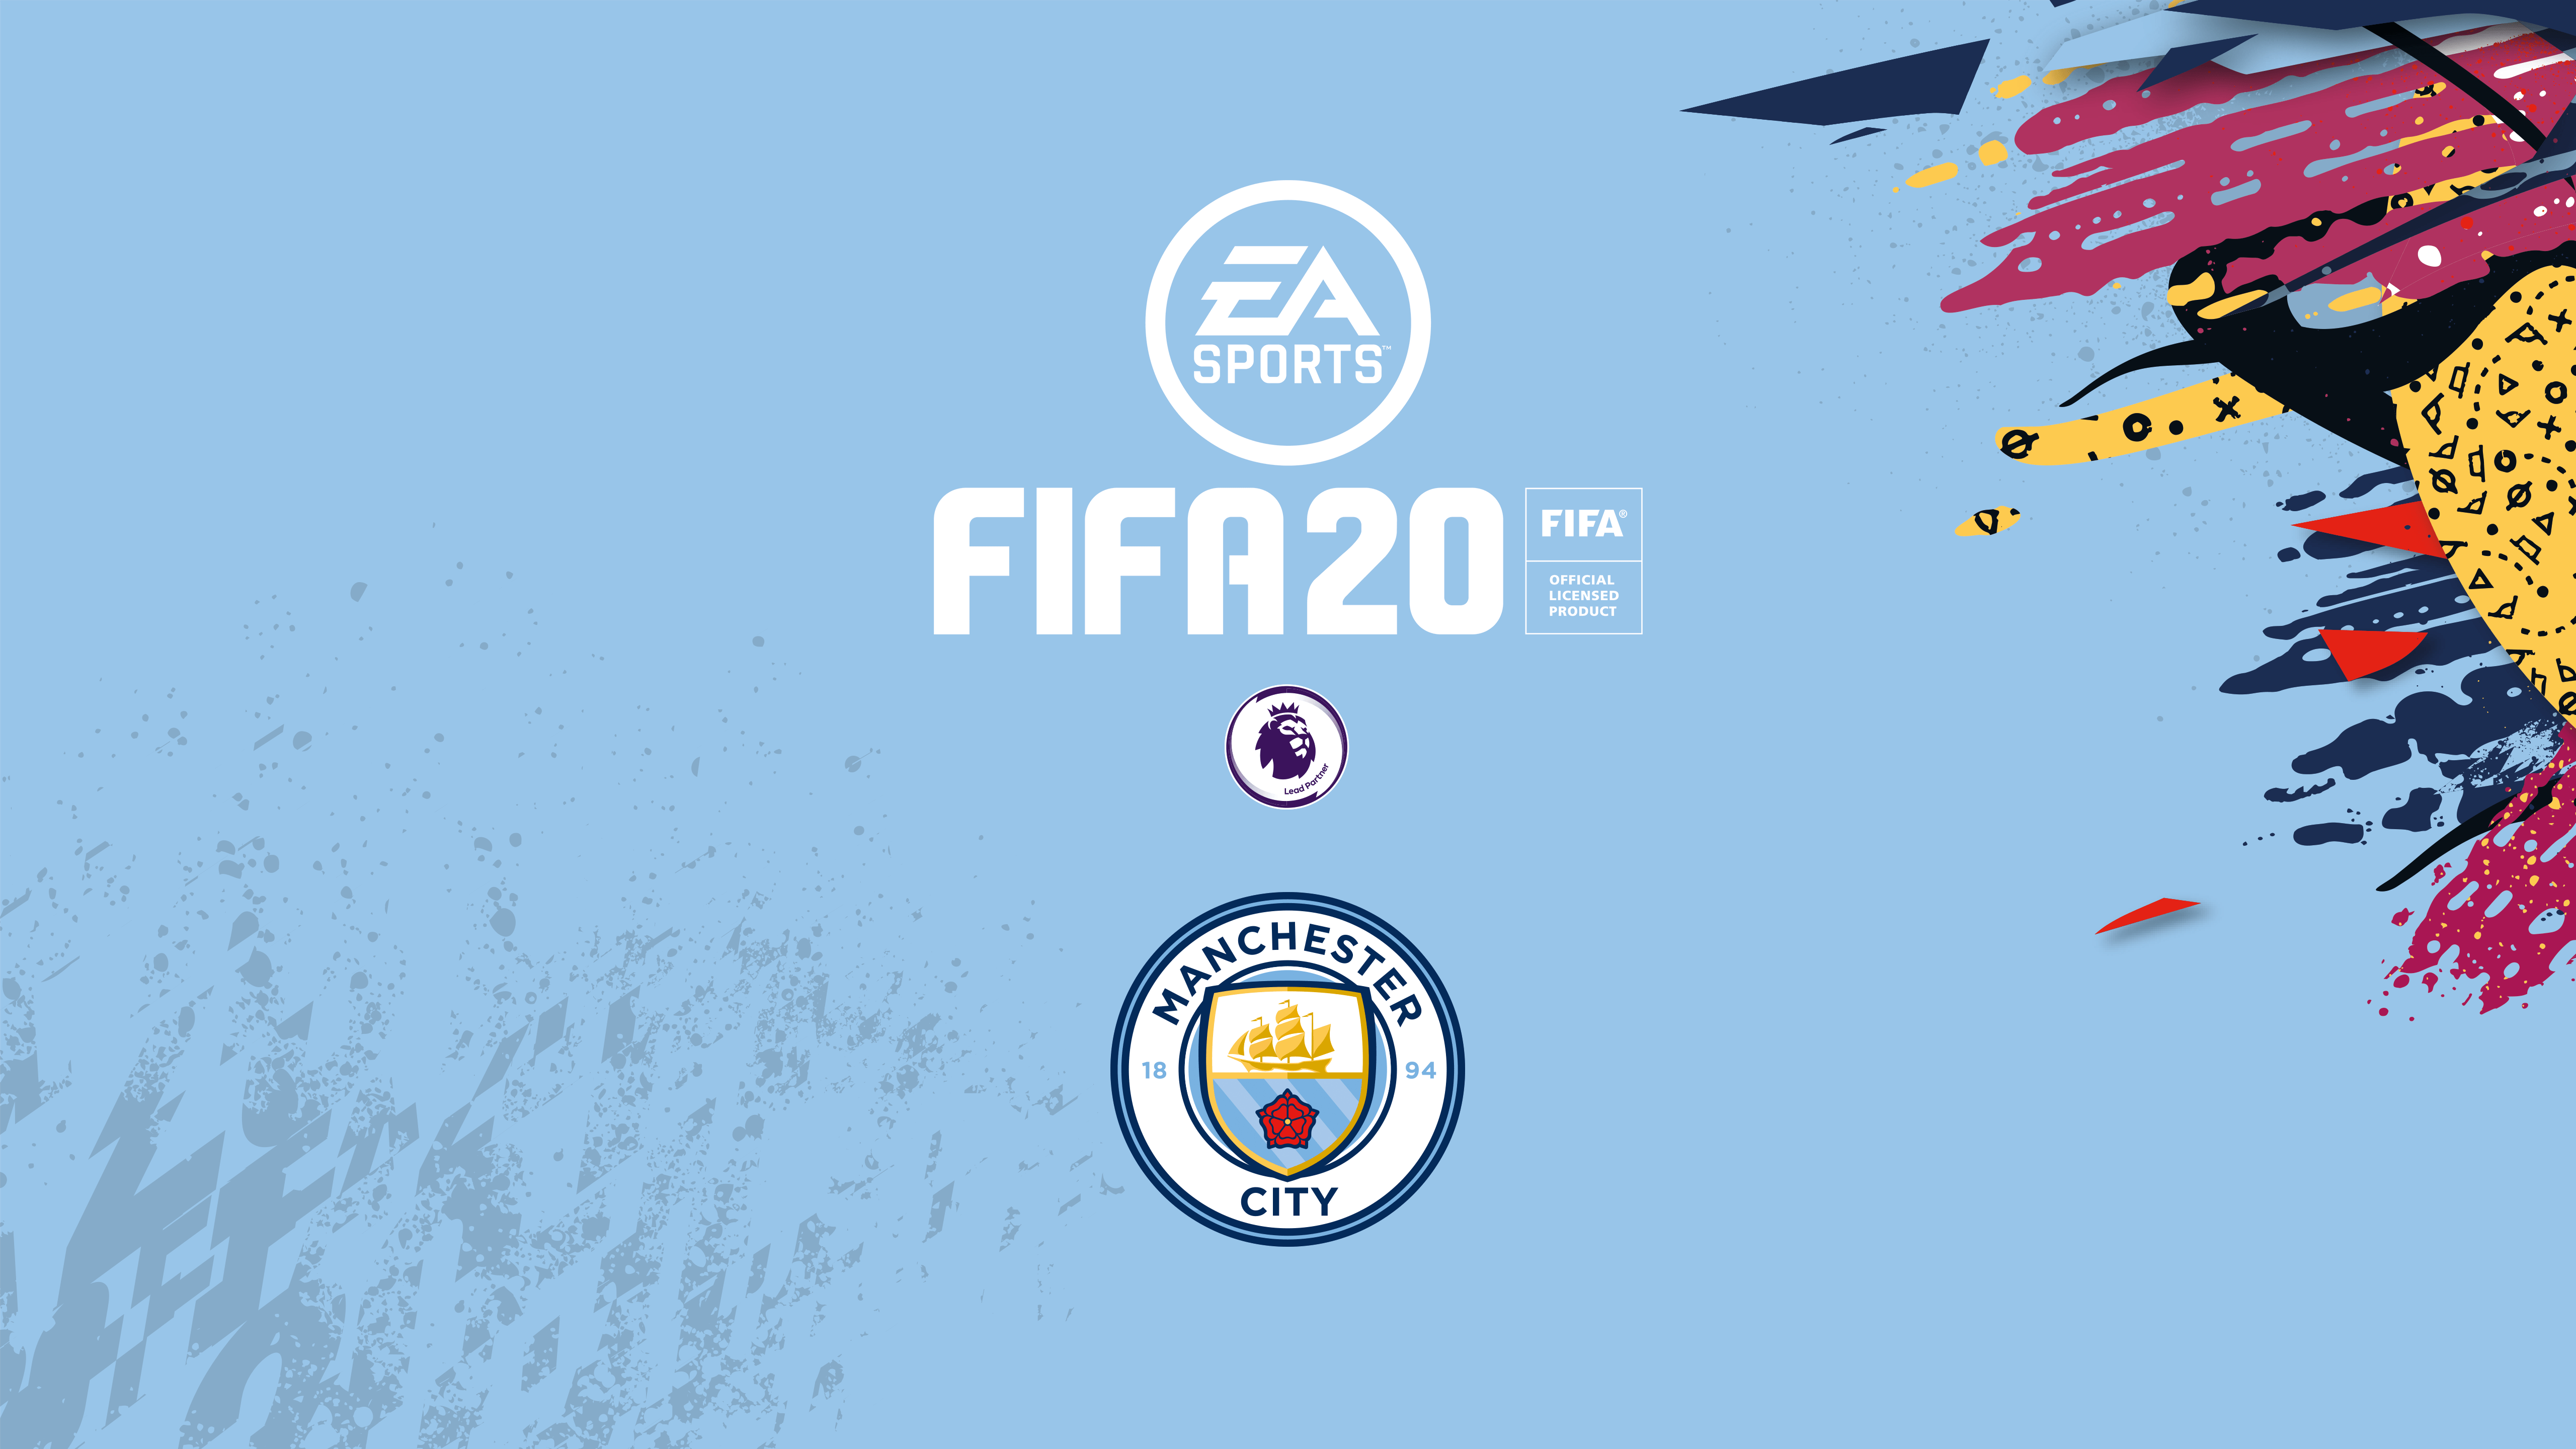 FIFA 20: Available the cover and wallpaper